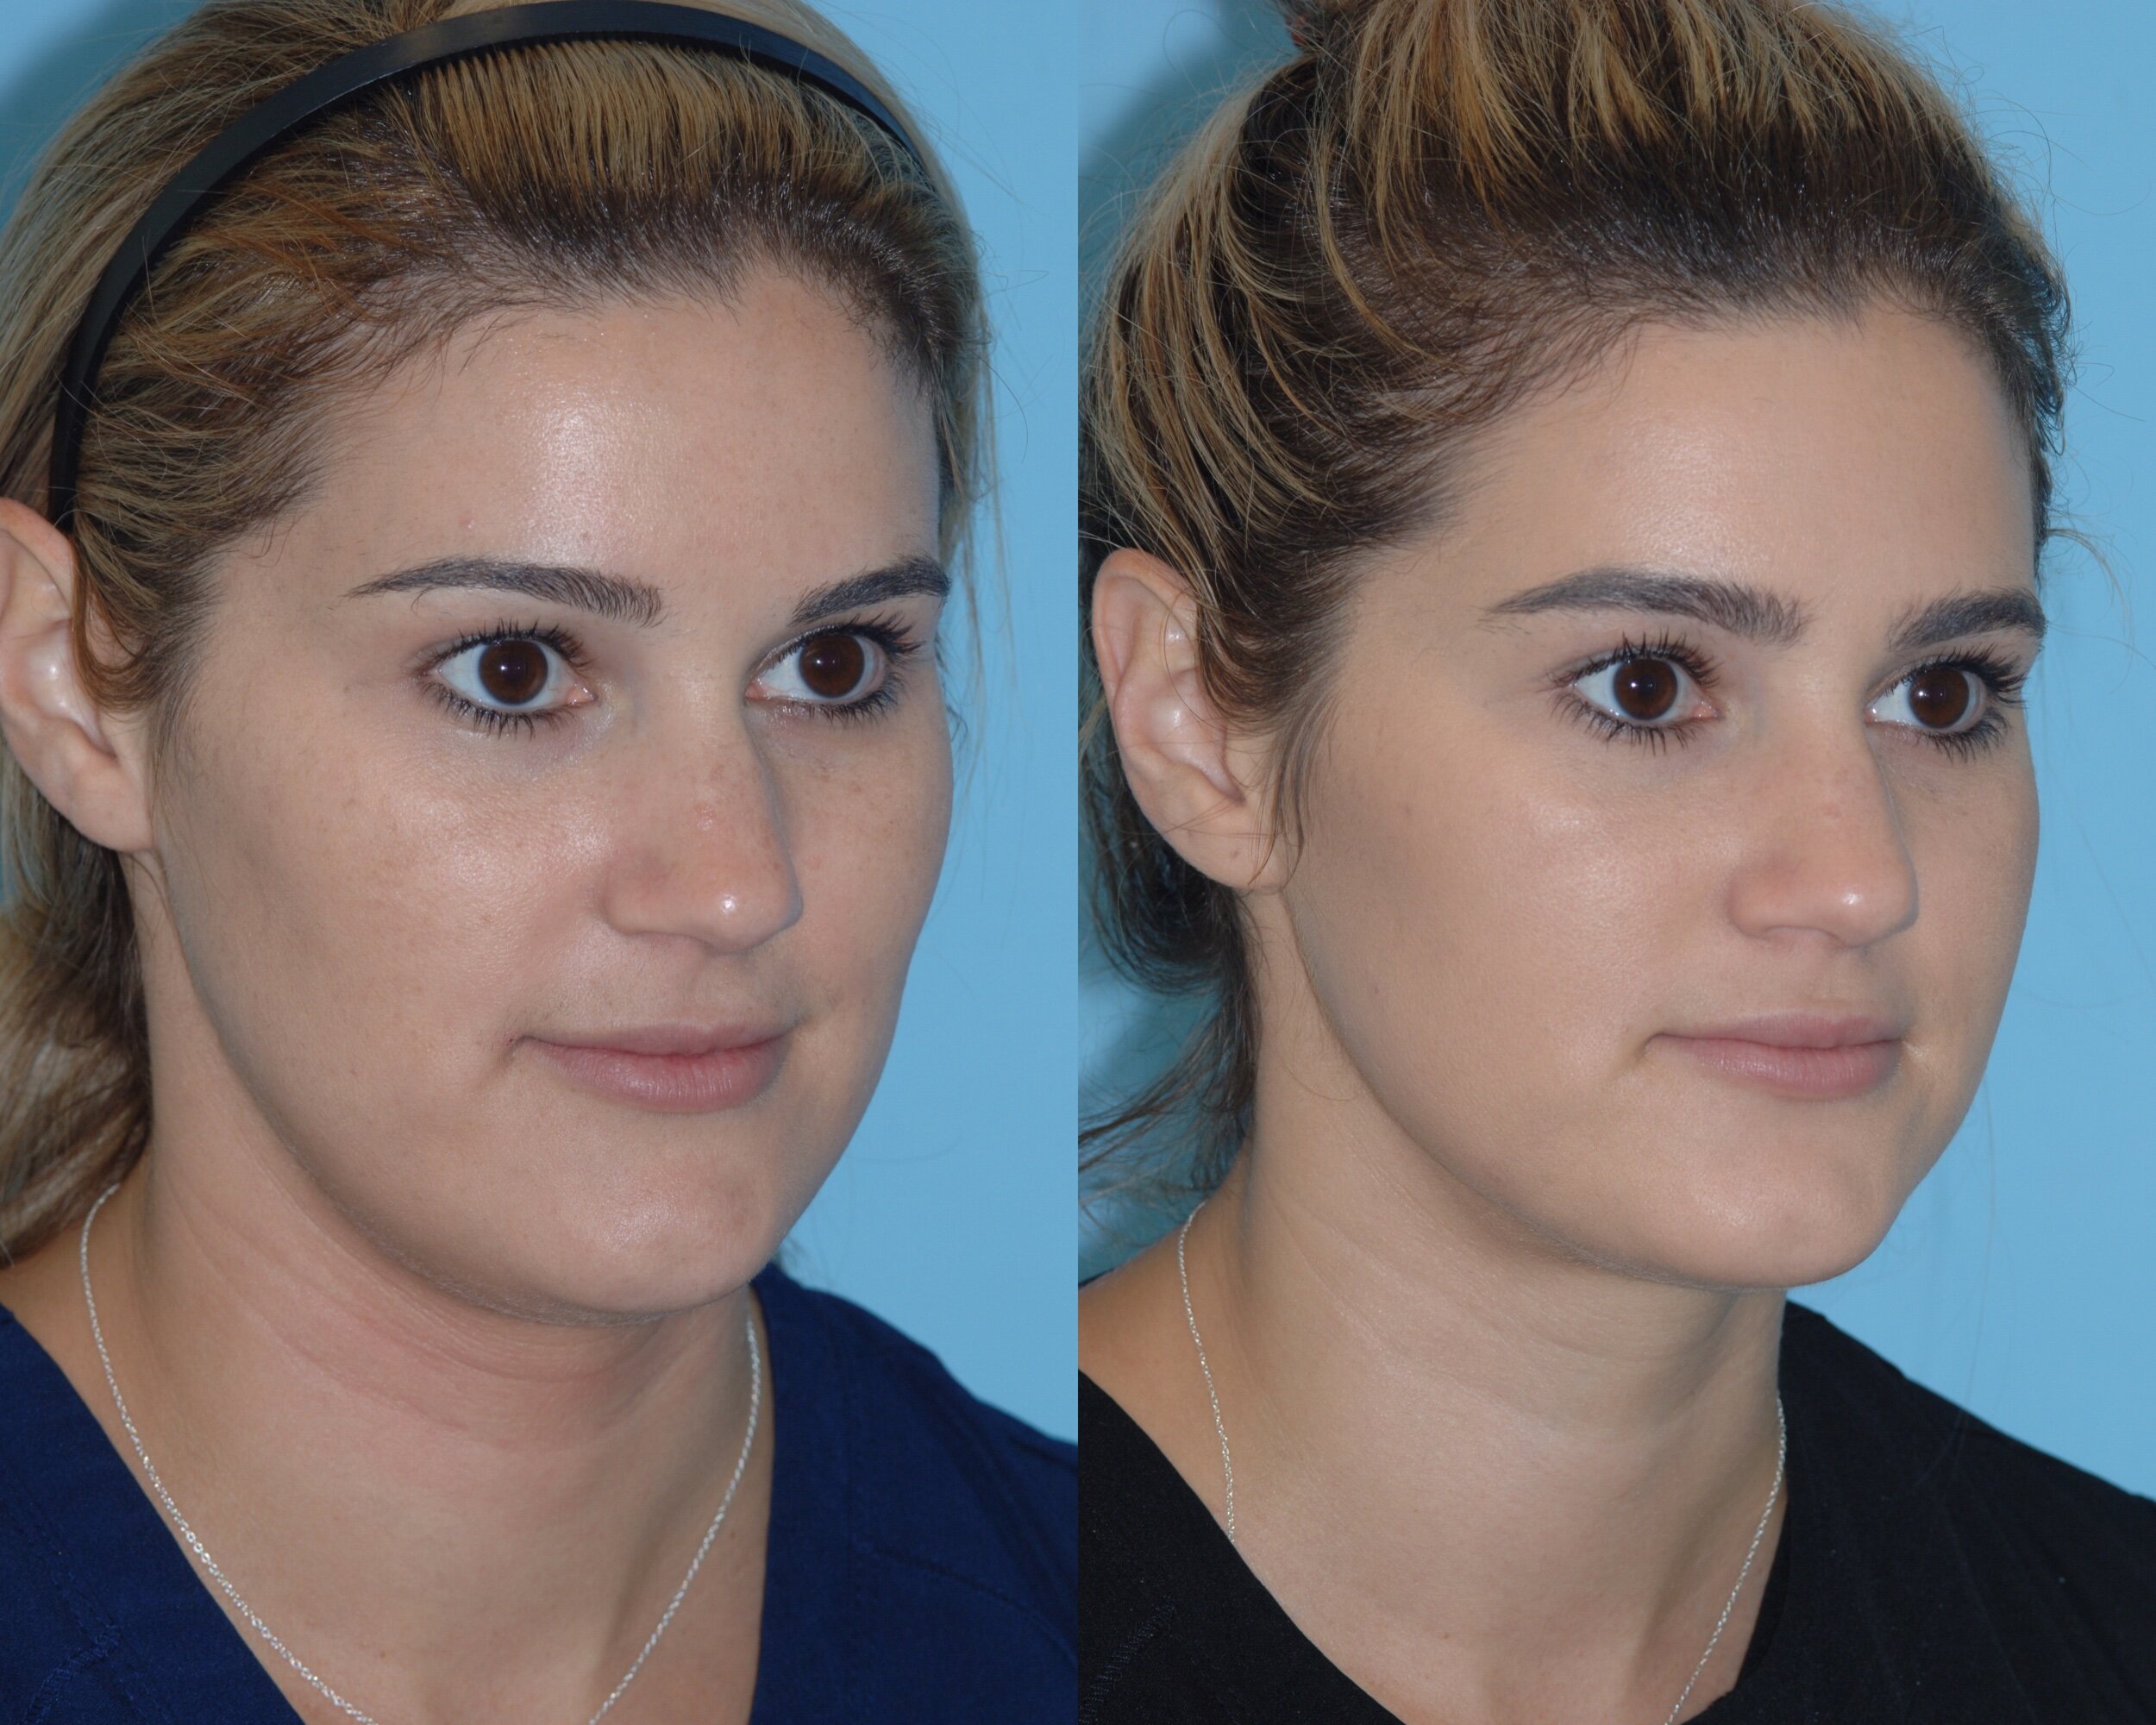  ThermiRF for minimally invasive skin tightening and submental liposuction   